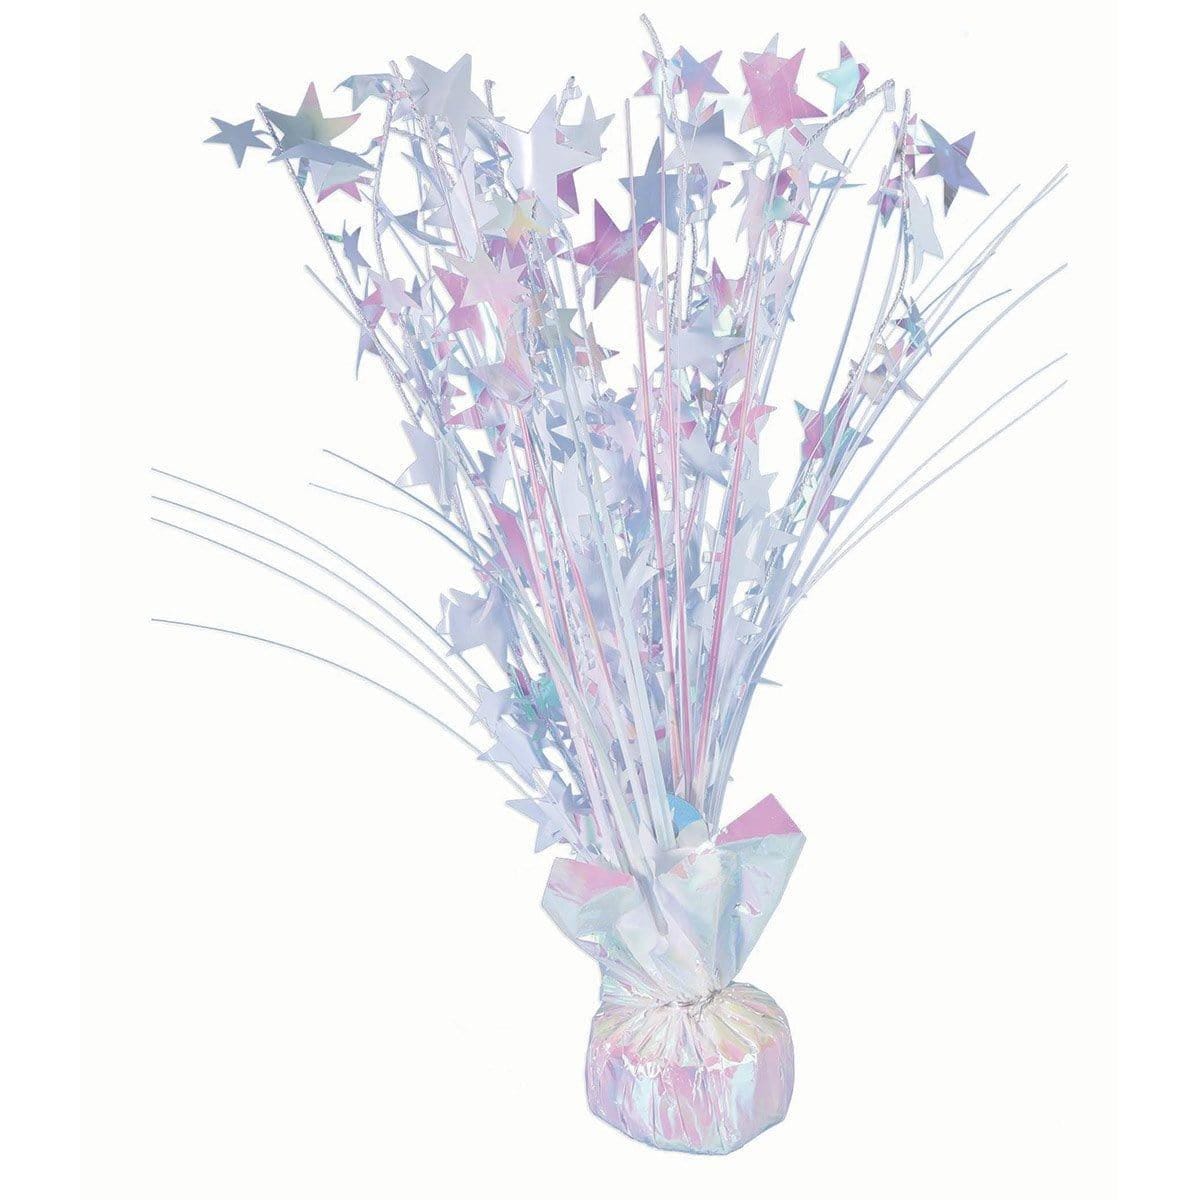 Buy Decorations Iridescent Star Centerpieces, 15 Inches sold at Party Expert